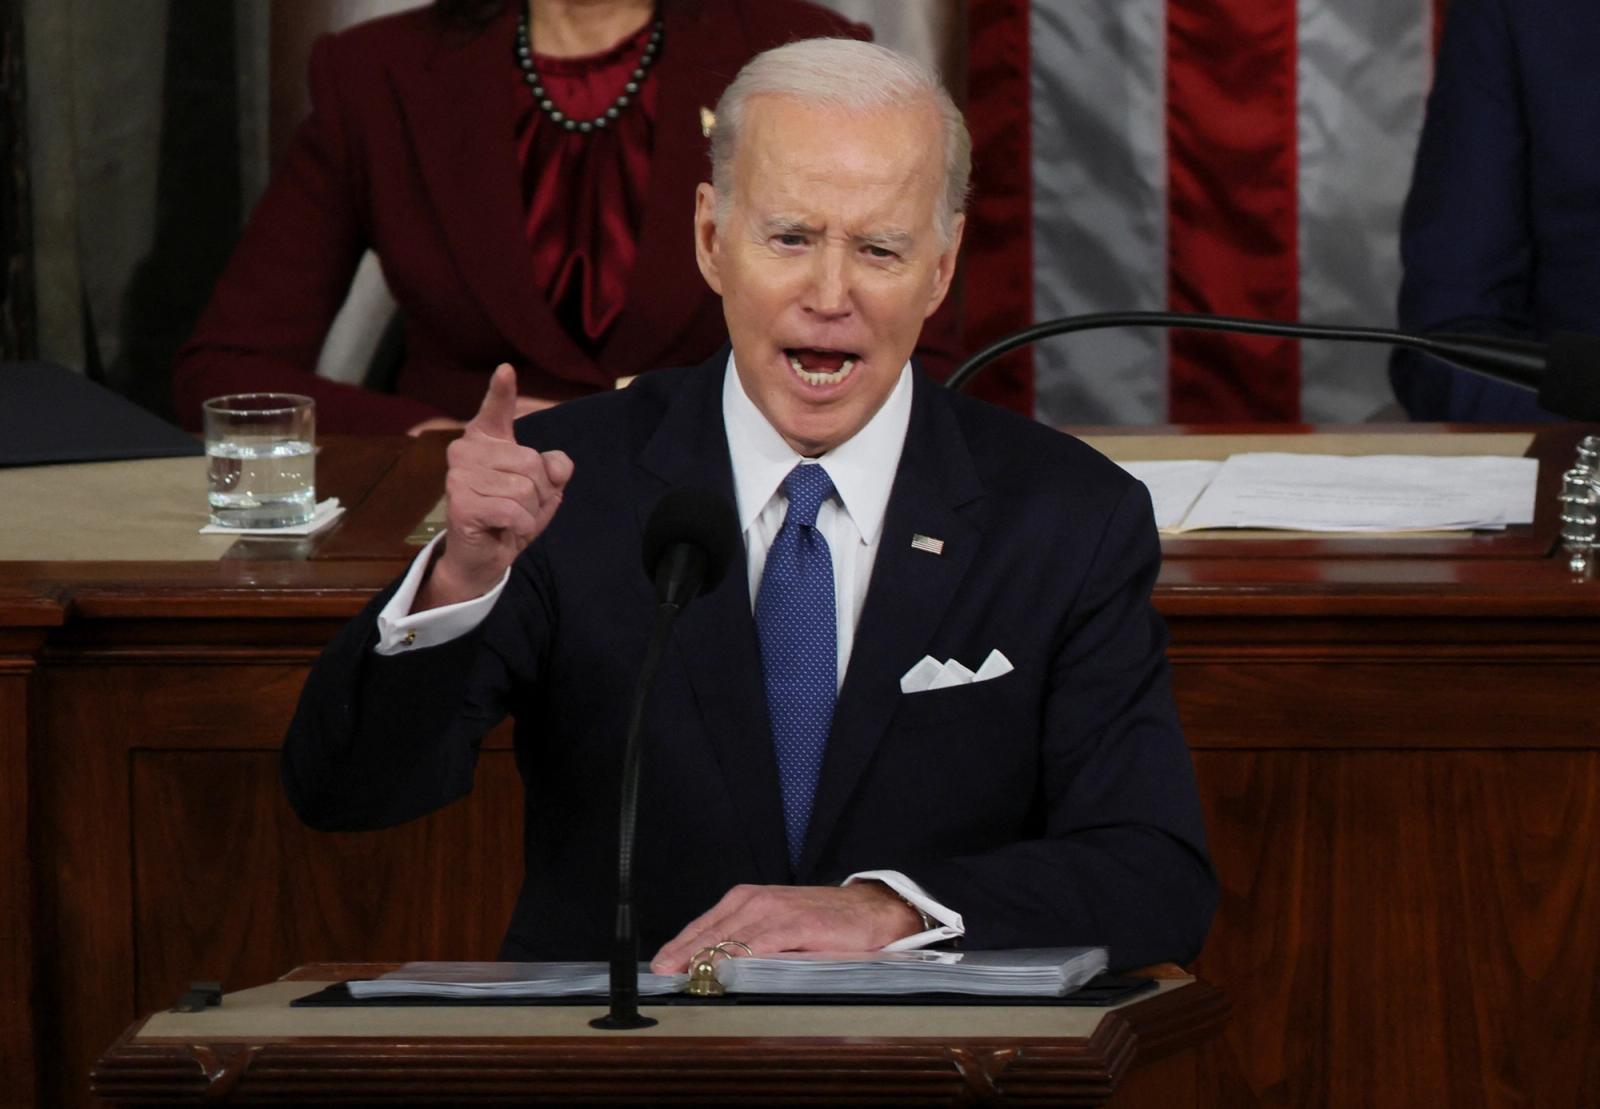 U.S. President Joe Biden delivers his State of the Union address during a joint session of Congress in the House Chamber at the U.S. Capitol in Washington, U.S., February 7, 2023. 